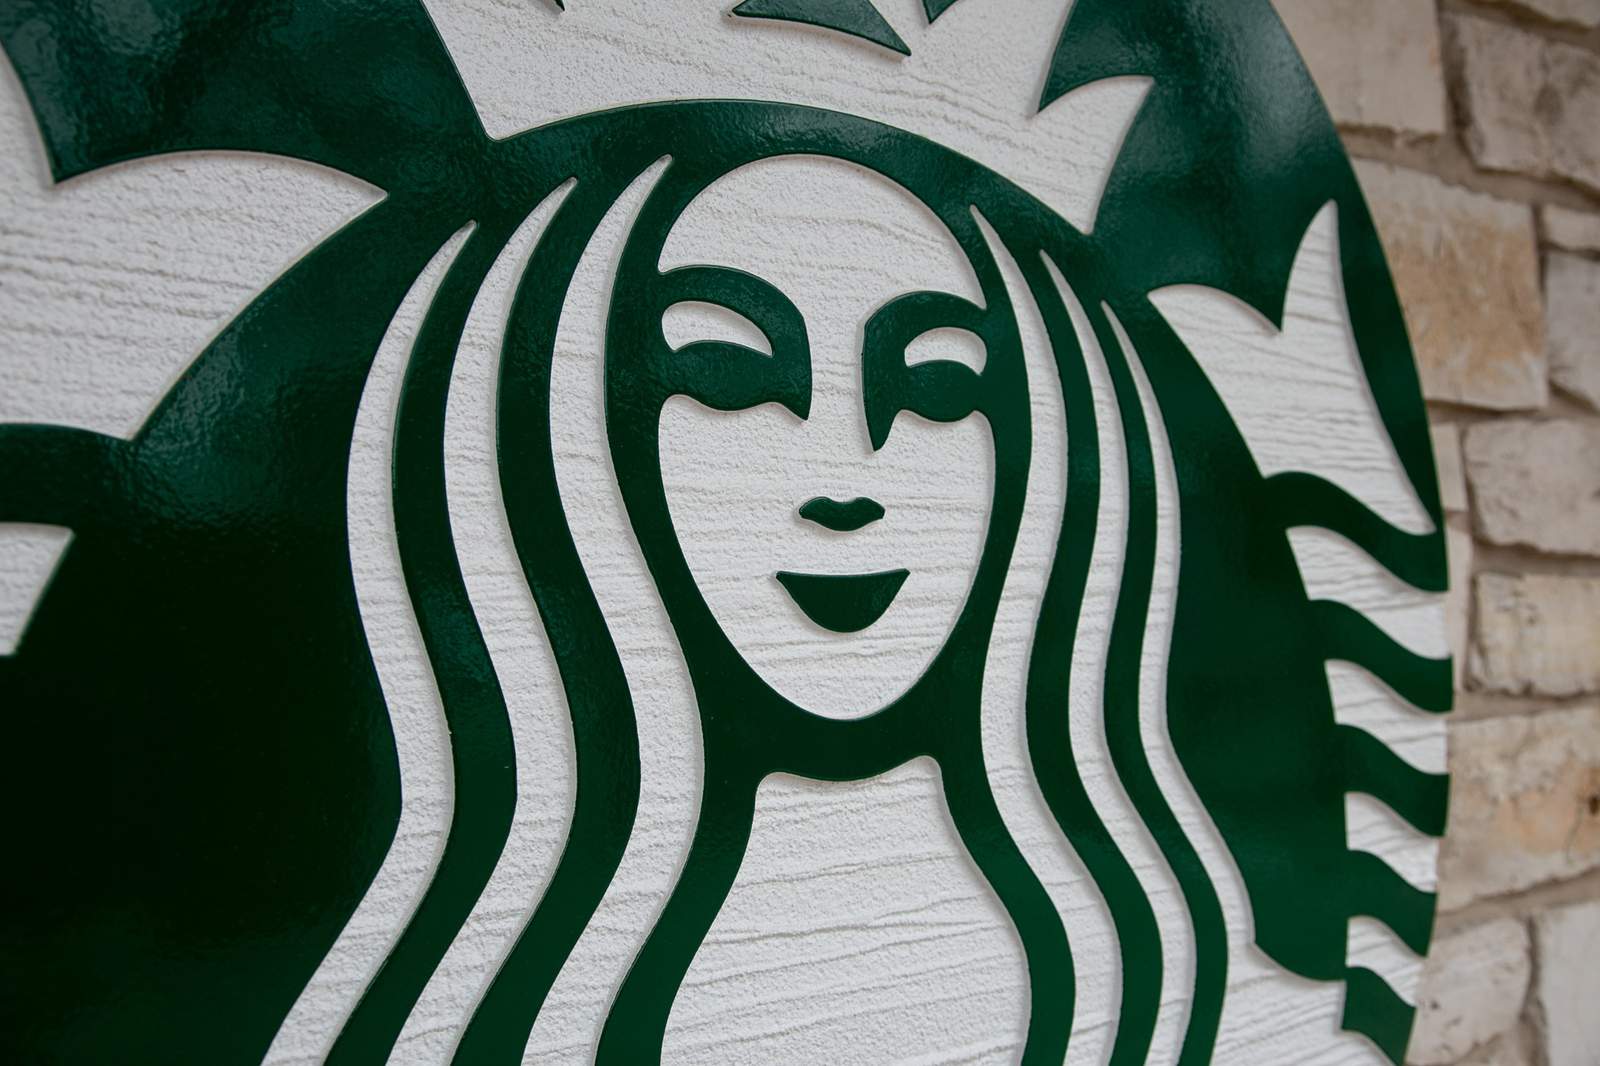 Starbucks extends free coffee offer for first responders and frontline workers through May 31